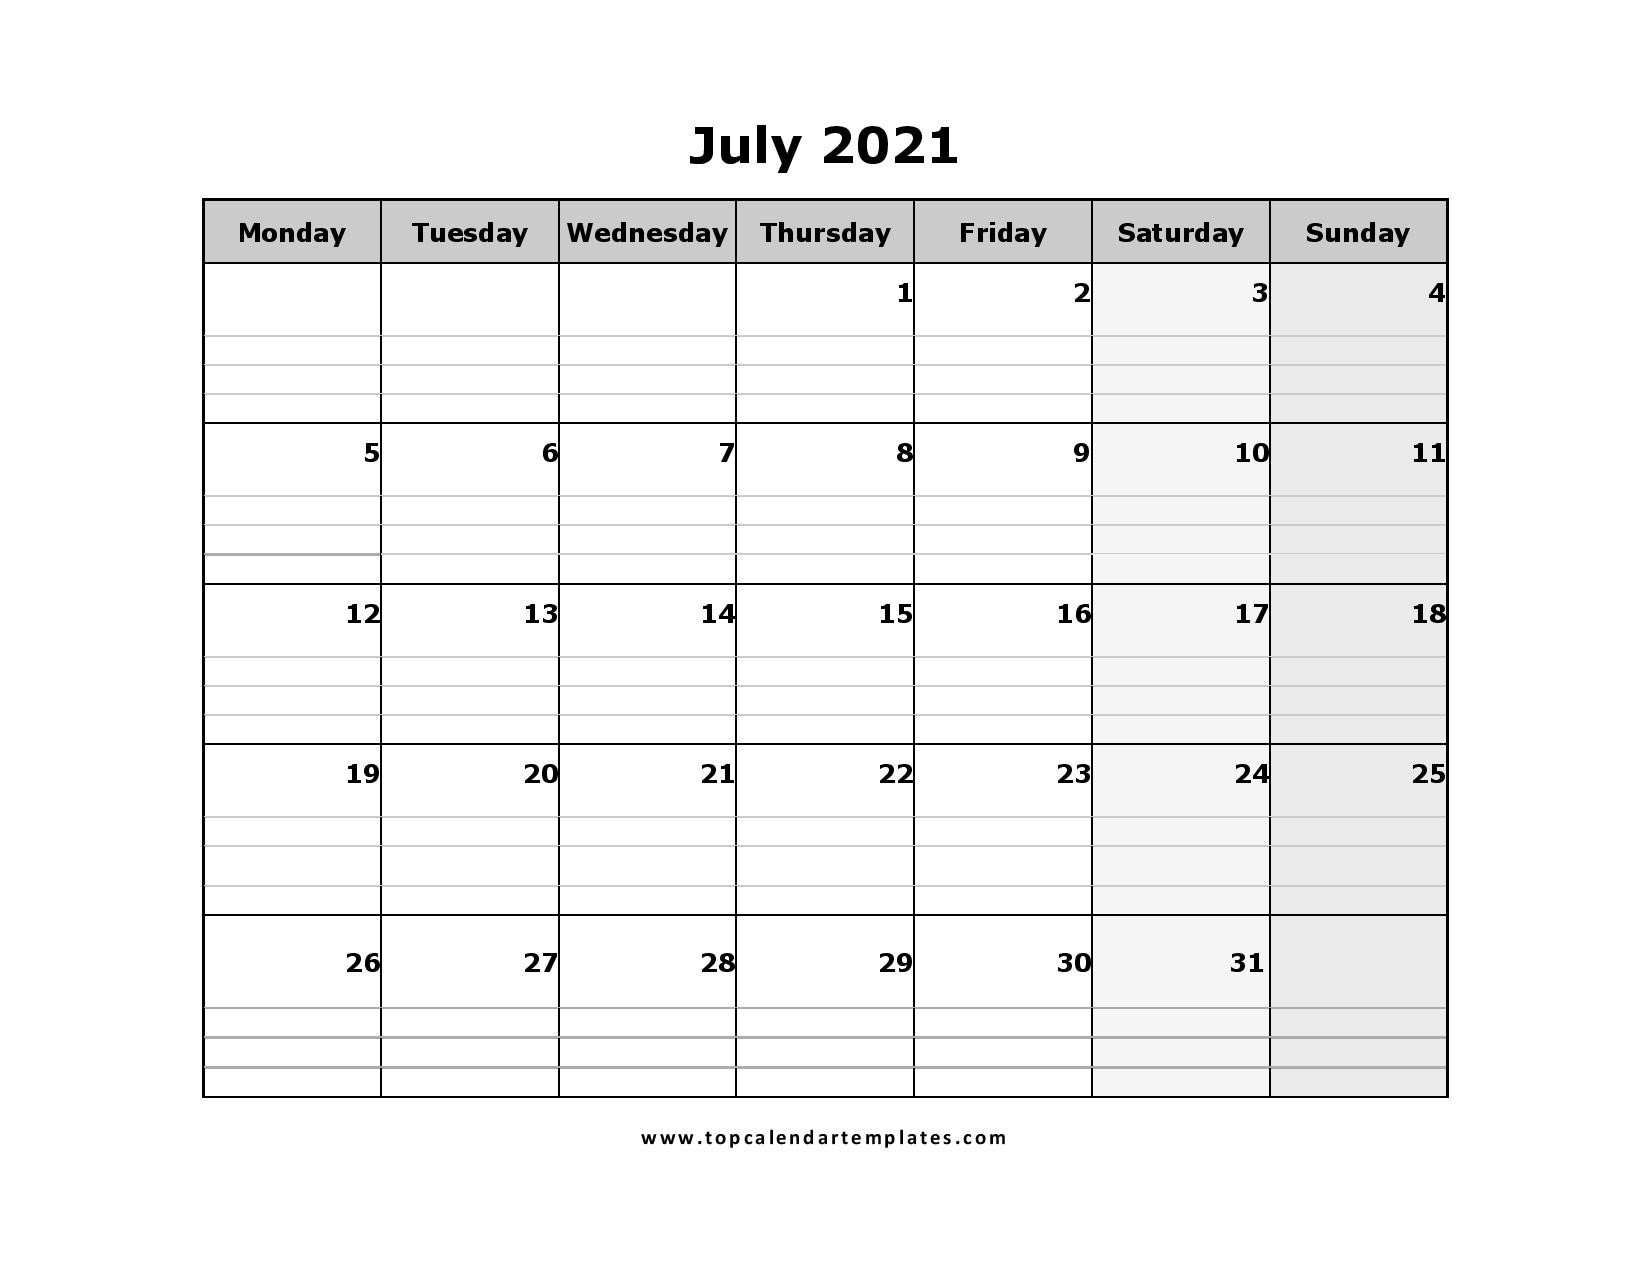 Printable July 2021 Calendar Template - Pdf, Word, Excel-Printable Vacation Schedule Template 2021